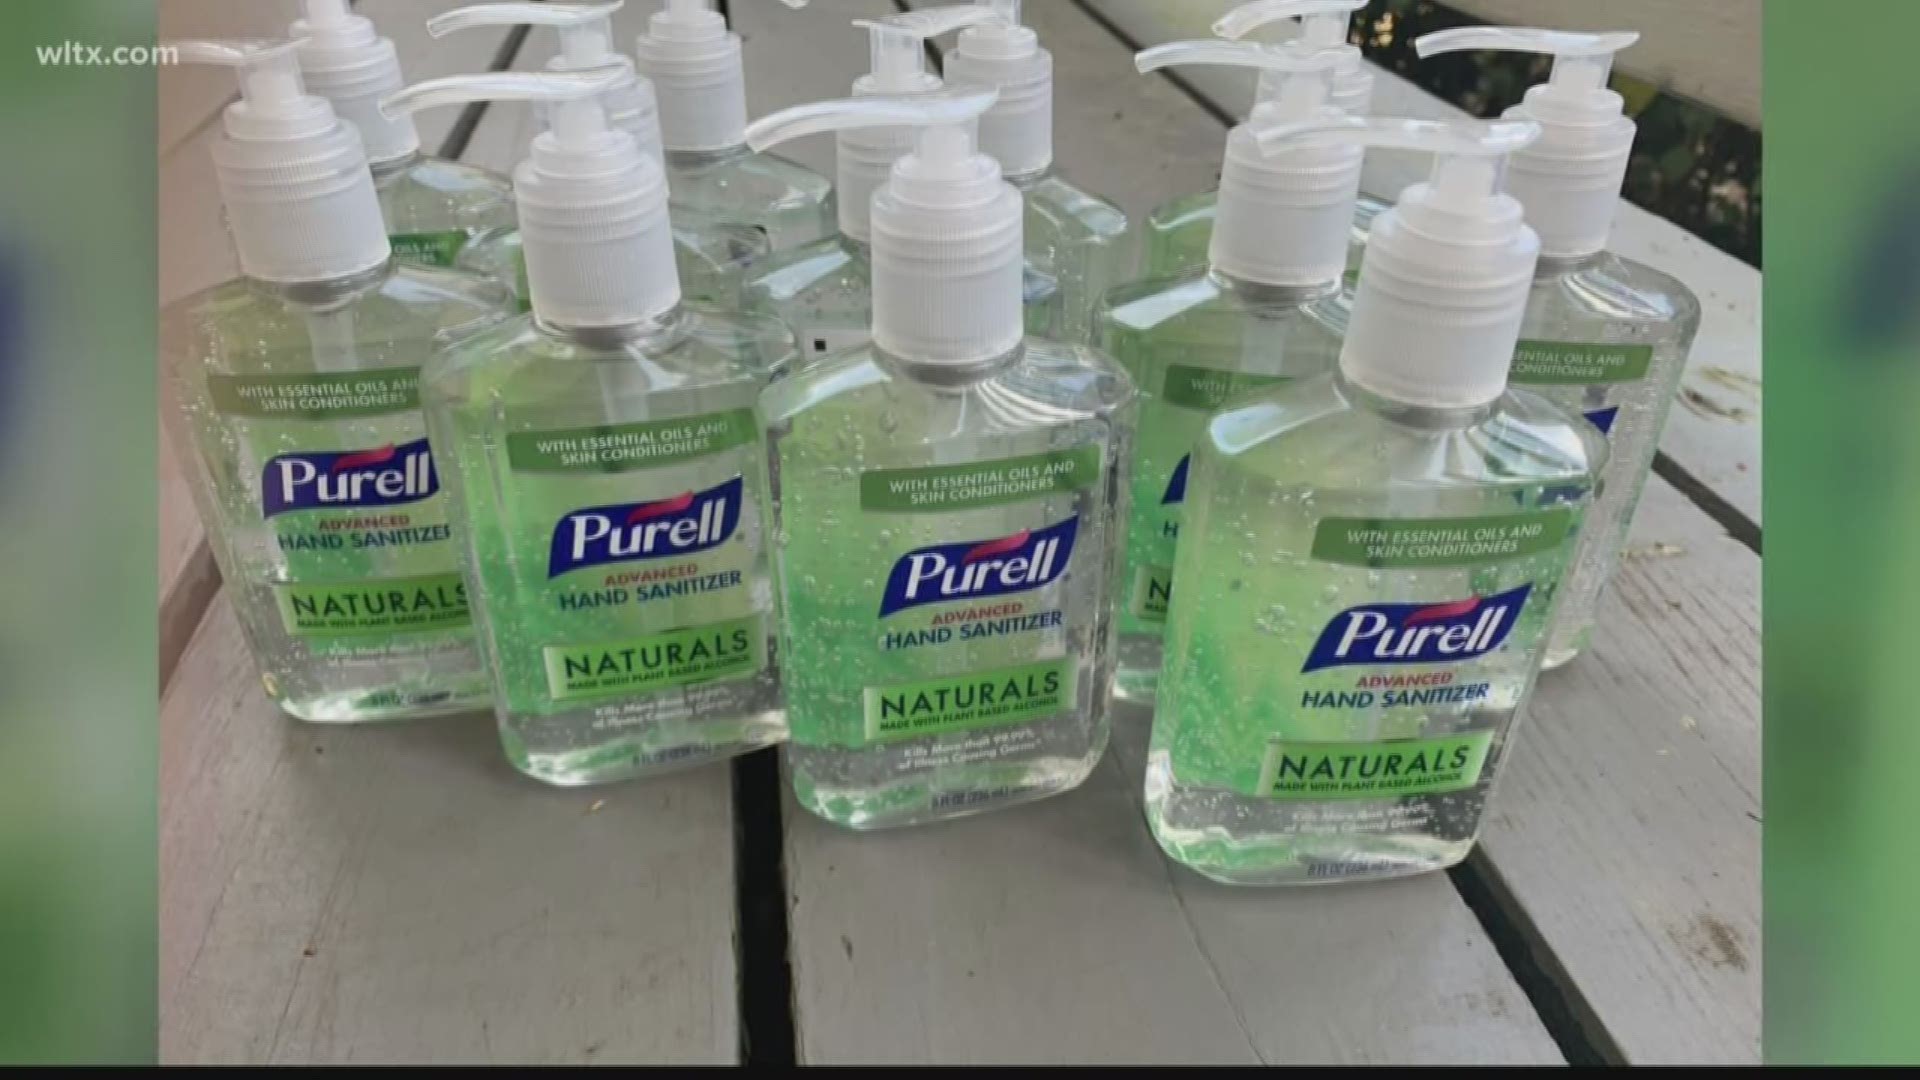 He found a lot of hand sanitizer online and he went and left them throughout his neighborhood.